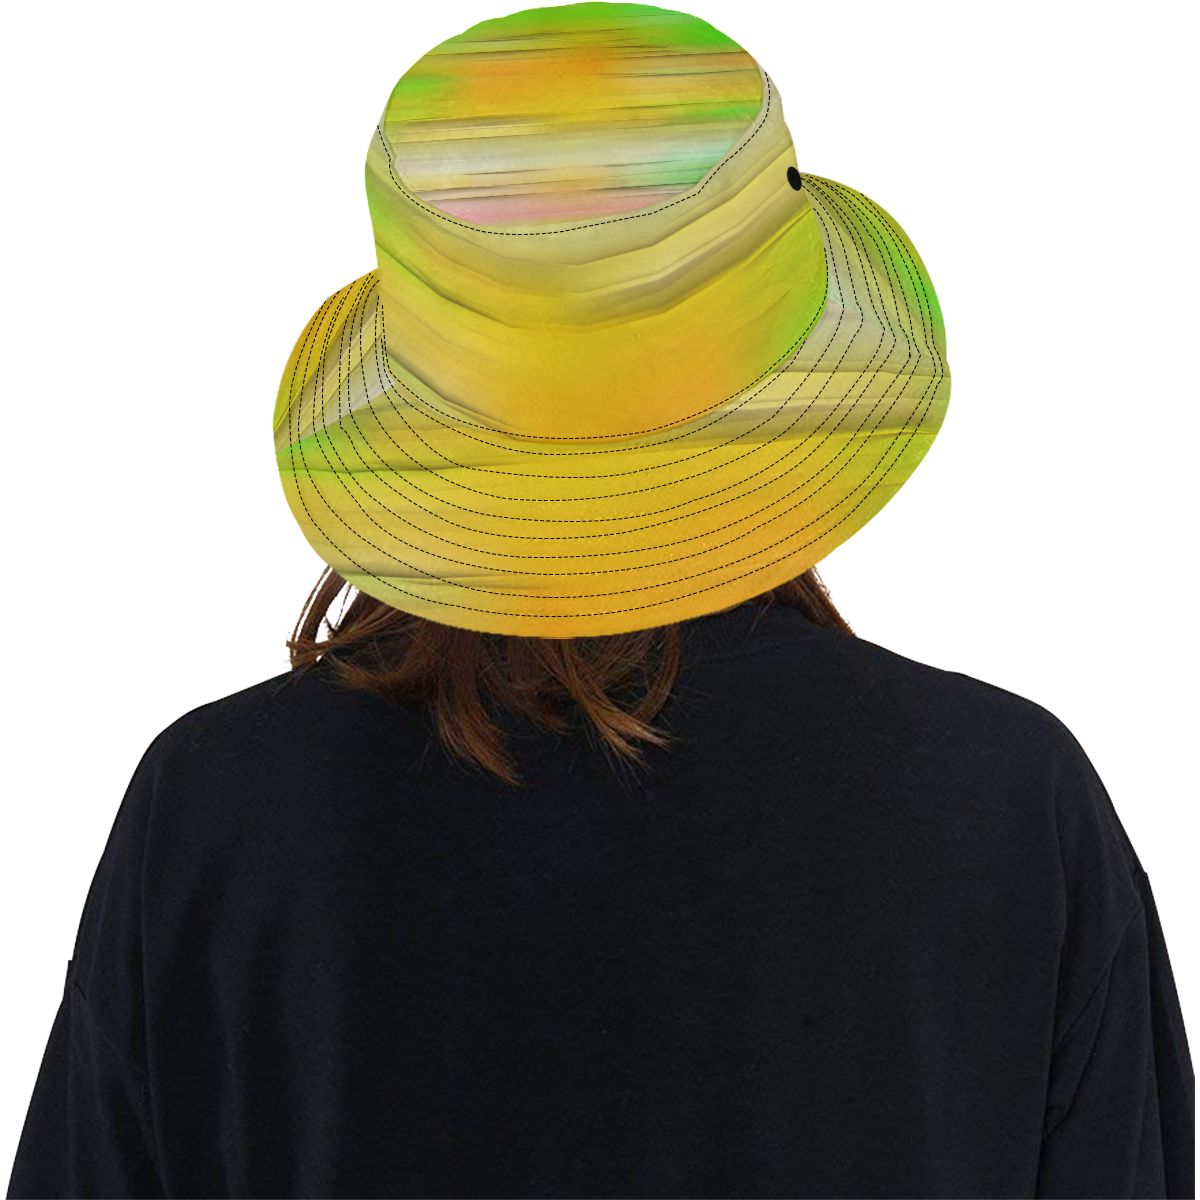 noisy gradient 2 by JamColors All Over Print Bucket Hat